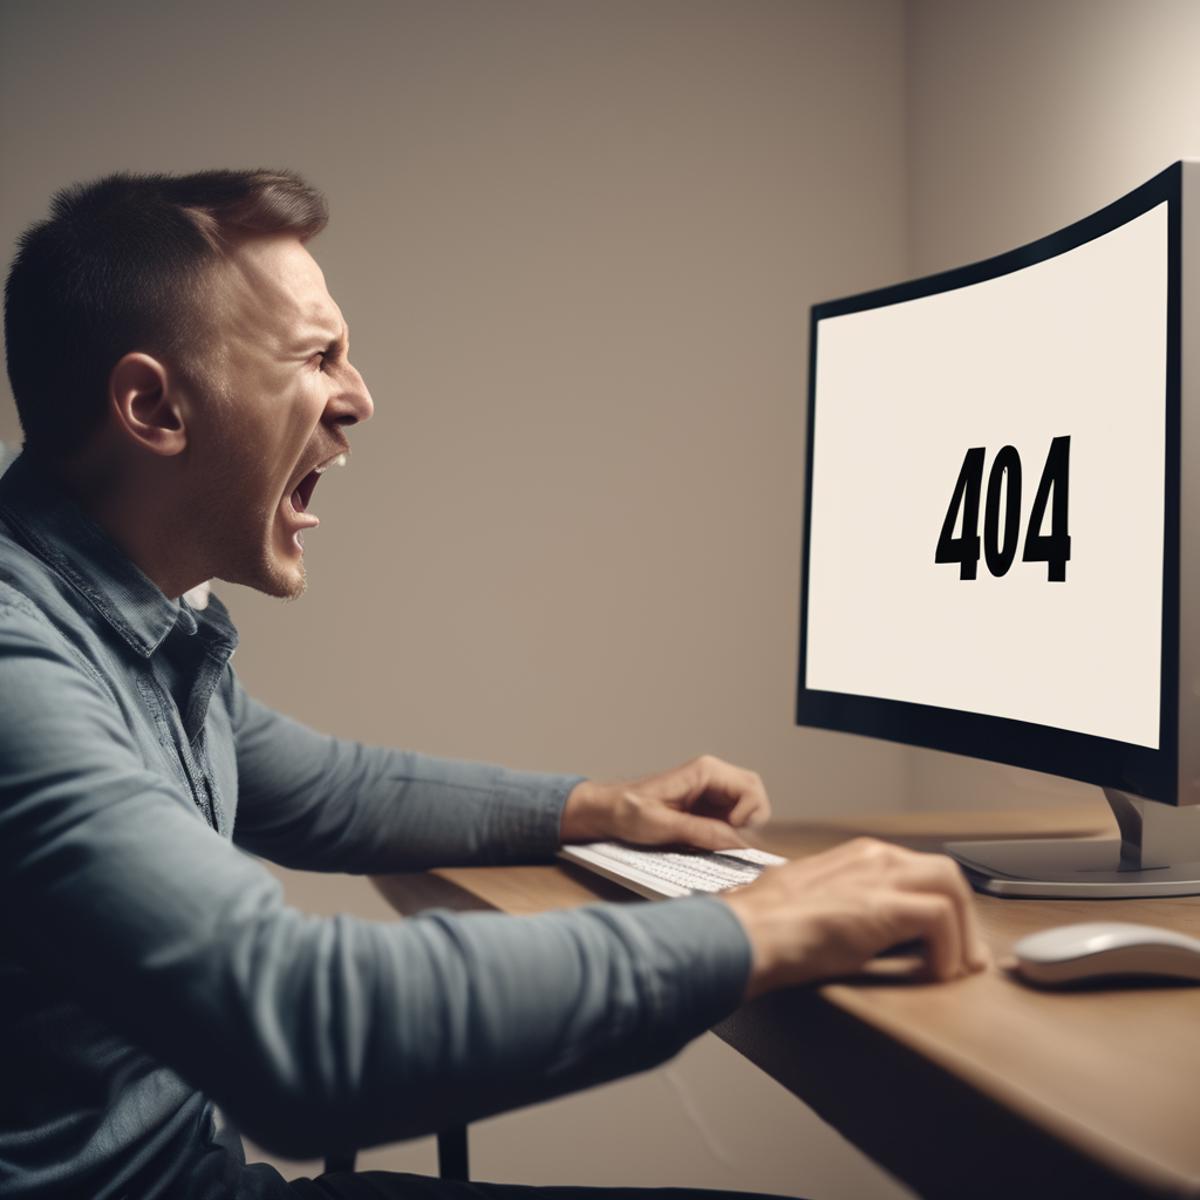 A man yelling in front of a computer with a 404 error on the screen.